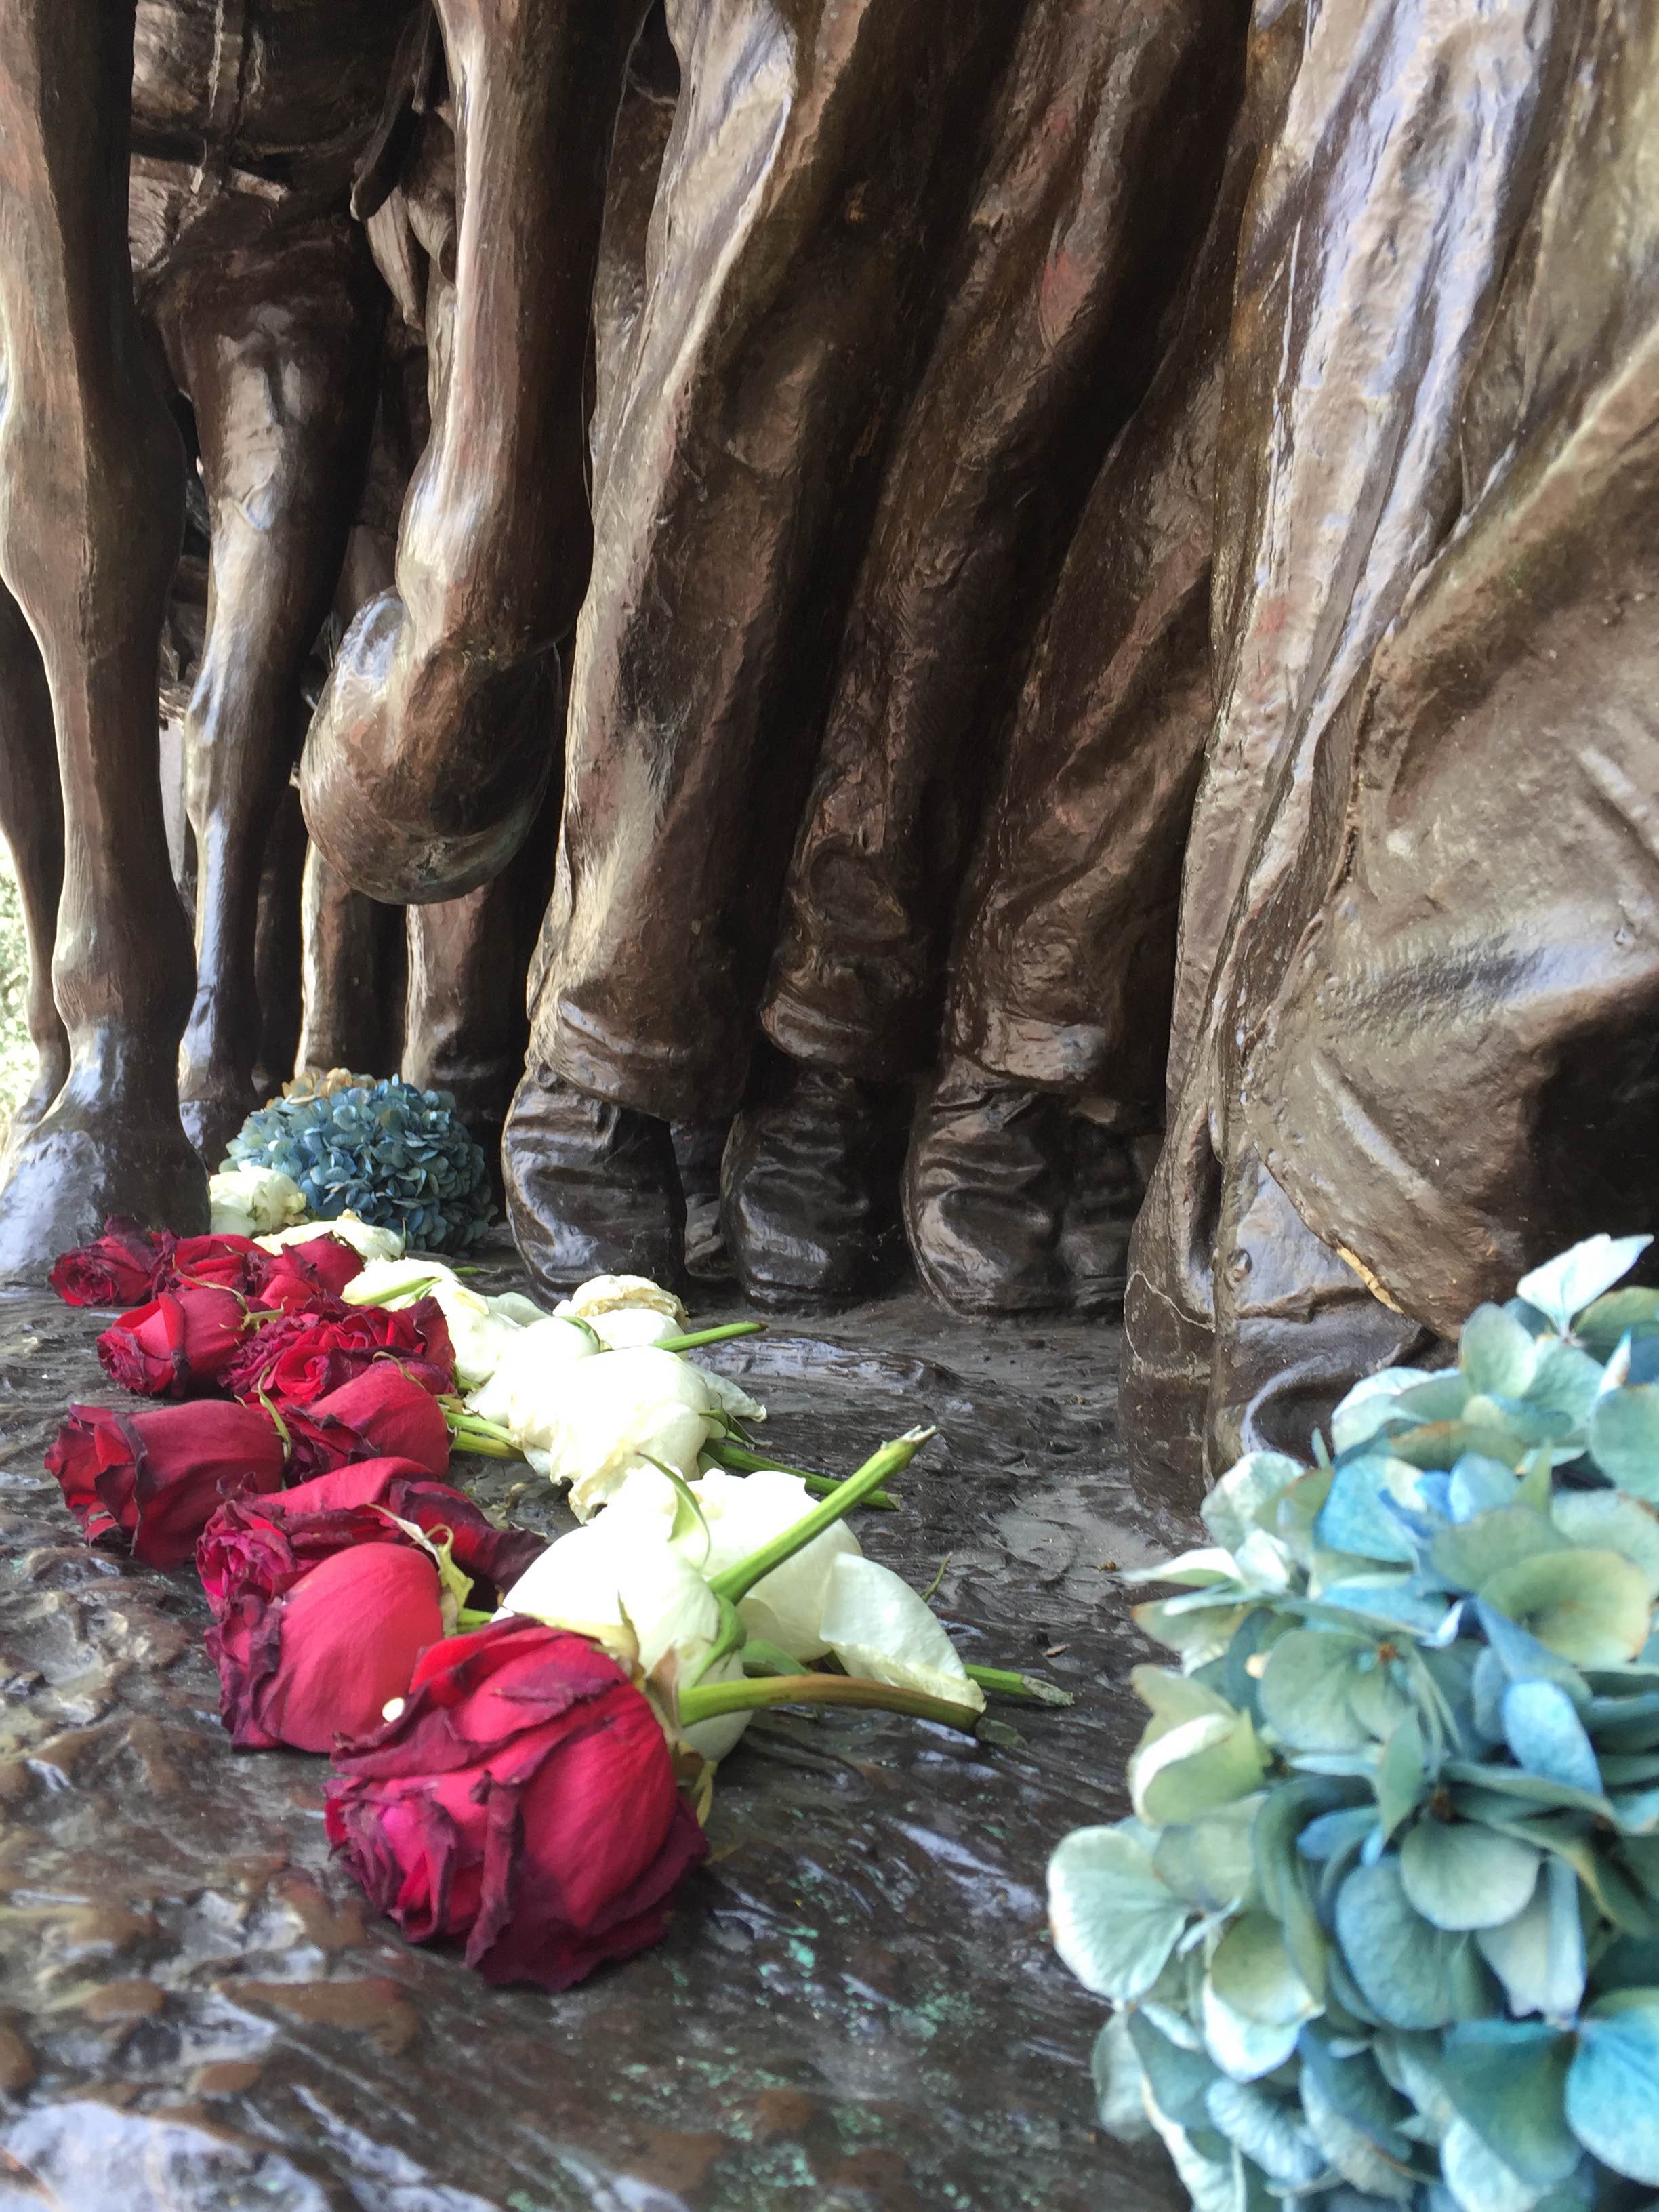 A close up image of flowers laid at the feet of the soldiers on the Shaw Memorial